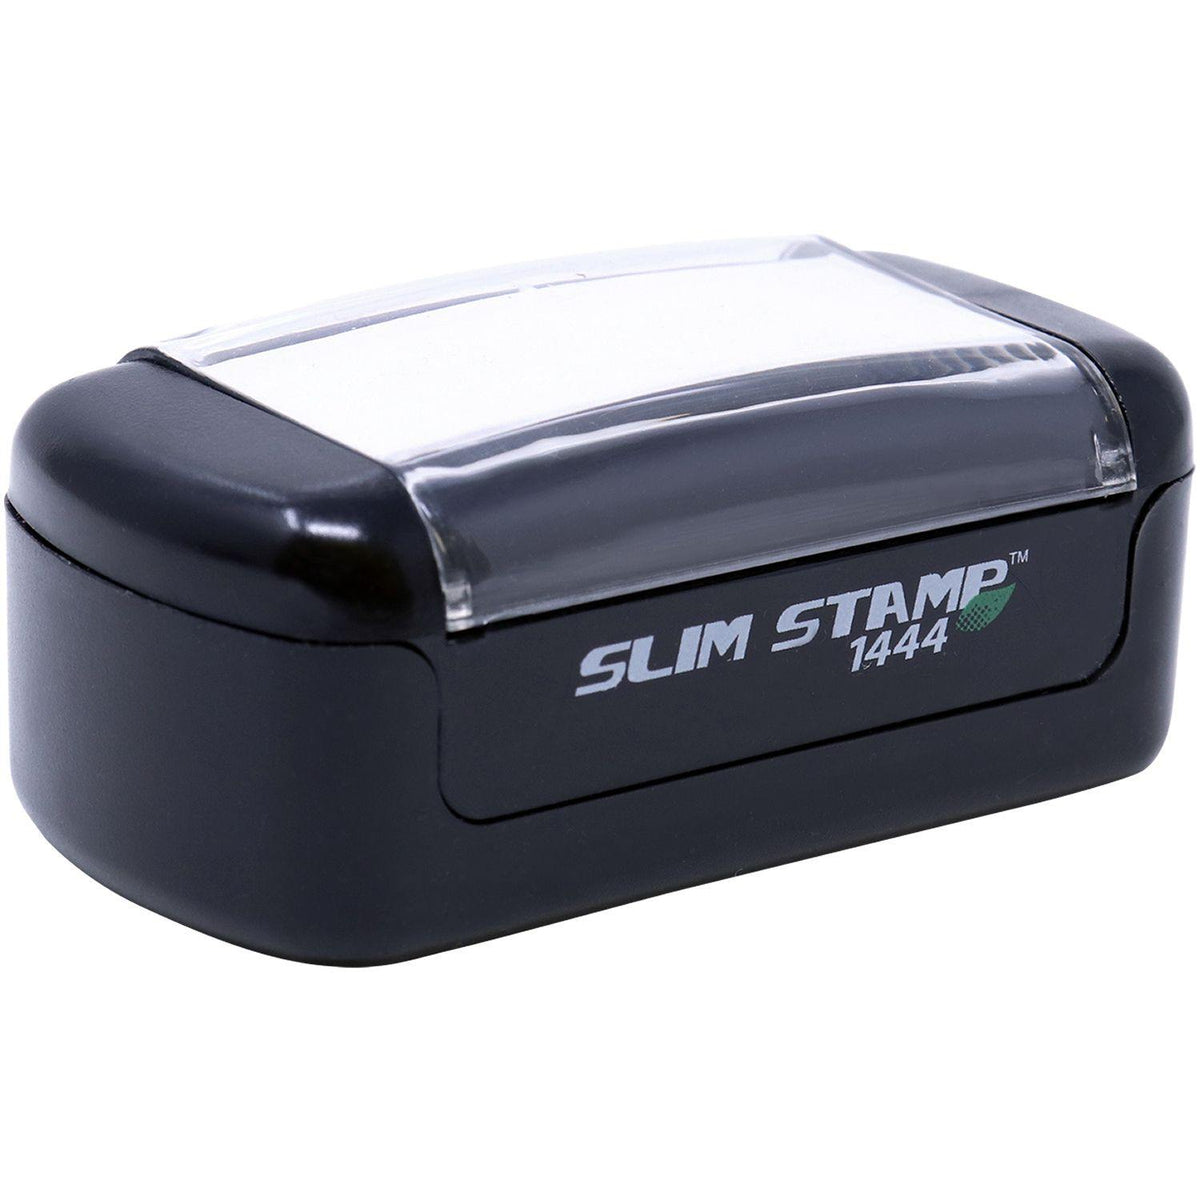 Slim Pre-Inked Bold File Stamp - Engineer Seal Stamps - Brand_Slim, Impression Size_Small, Stamp Type_Pre-Inked Stamp, Type of Use_General, Type of Use_Office